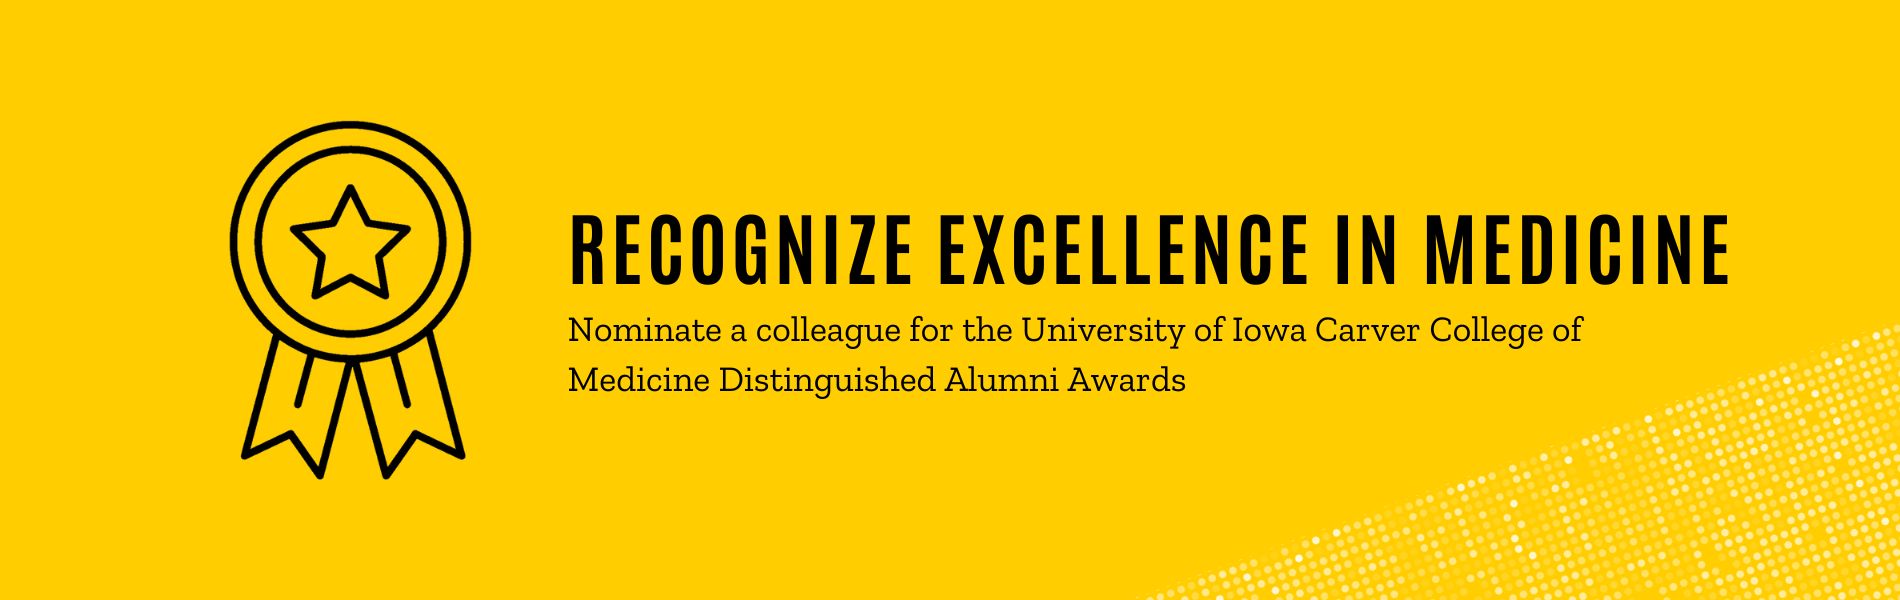 Recognize excellence in medicine. Nominate a colleague for the University of Iowa Carver College of Medicine Distinguished Alumni Awards